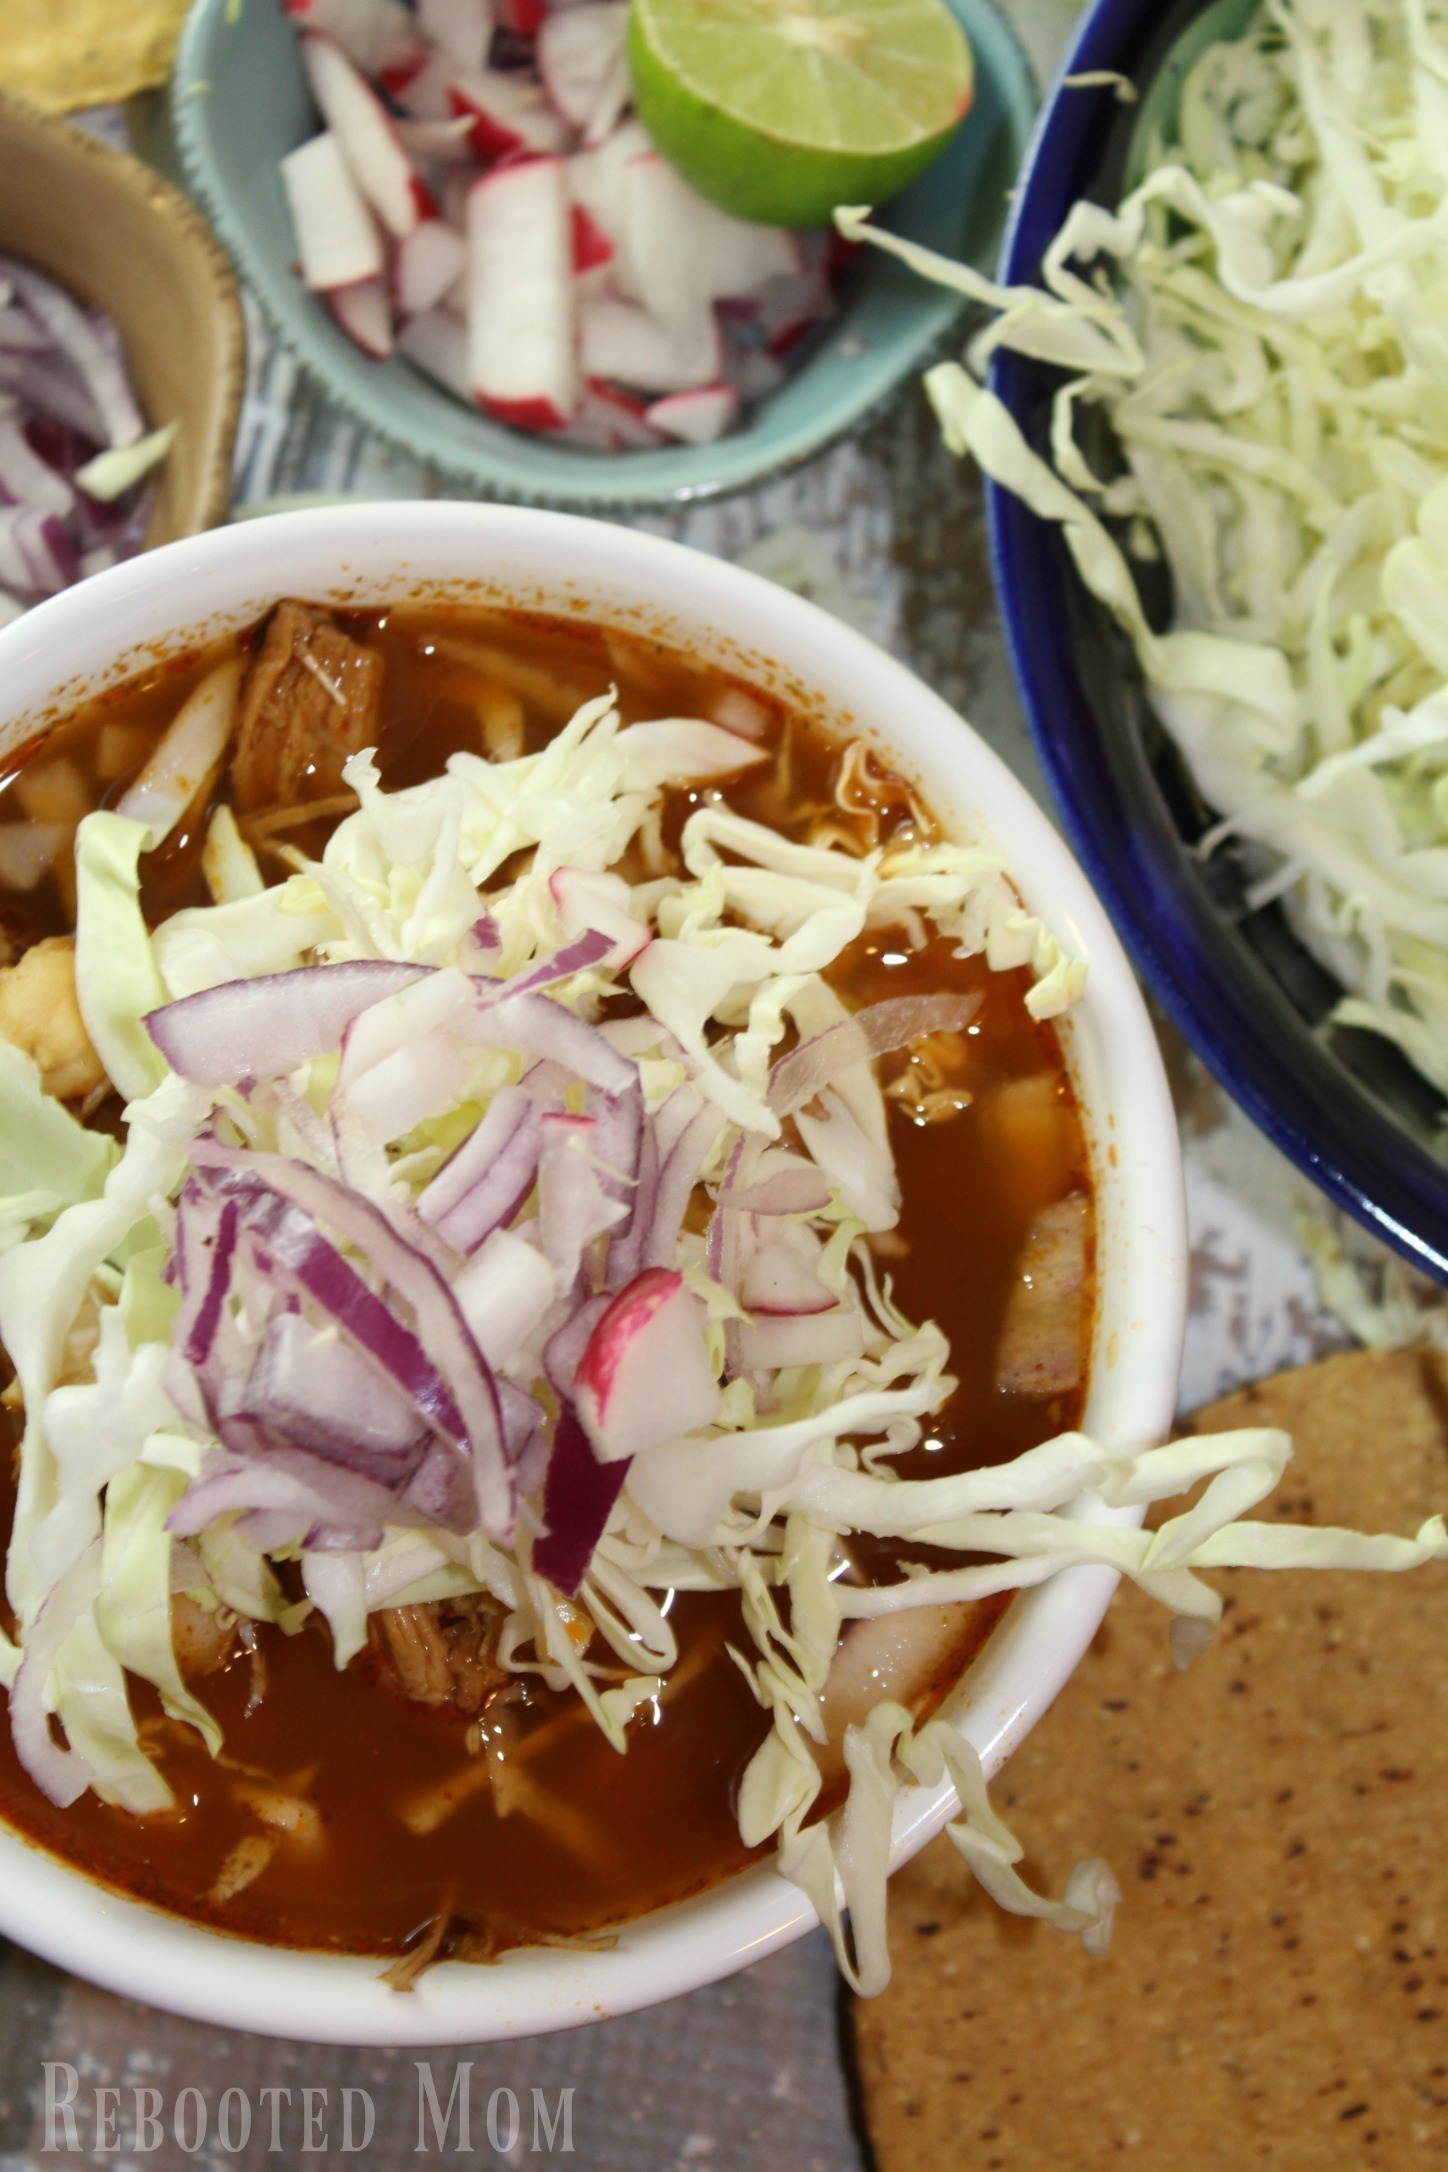 This Mexican stew features chiles and hominy, in a rich flavorsome broth. Dress up the stew with radishes, onions and sliced cabbage. It's traditional to serve the chicken in whole pieces but you can also pull it off the bone for even greater flavor.